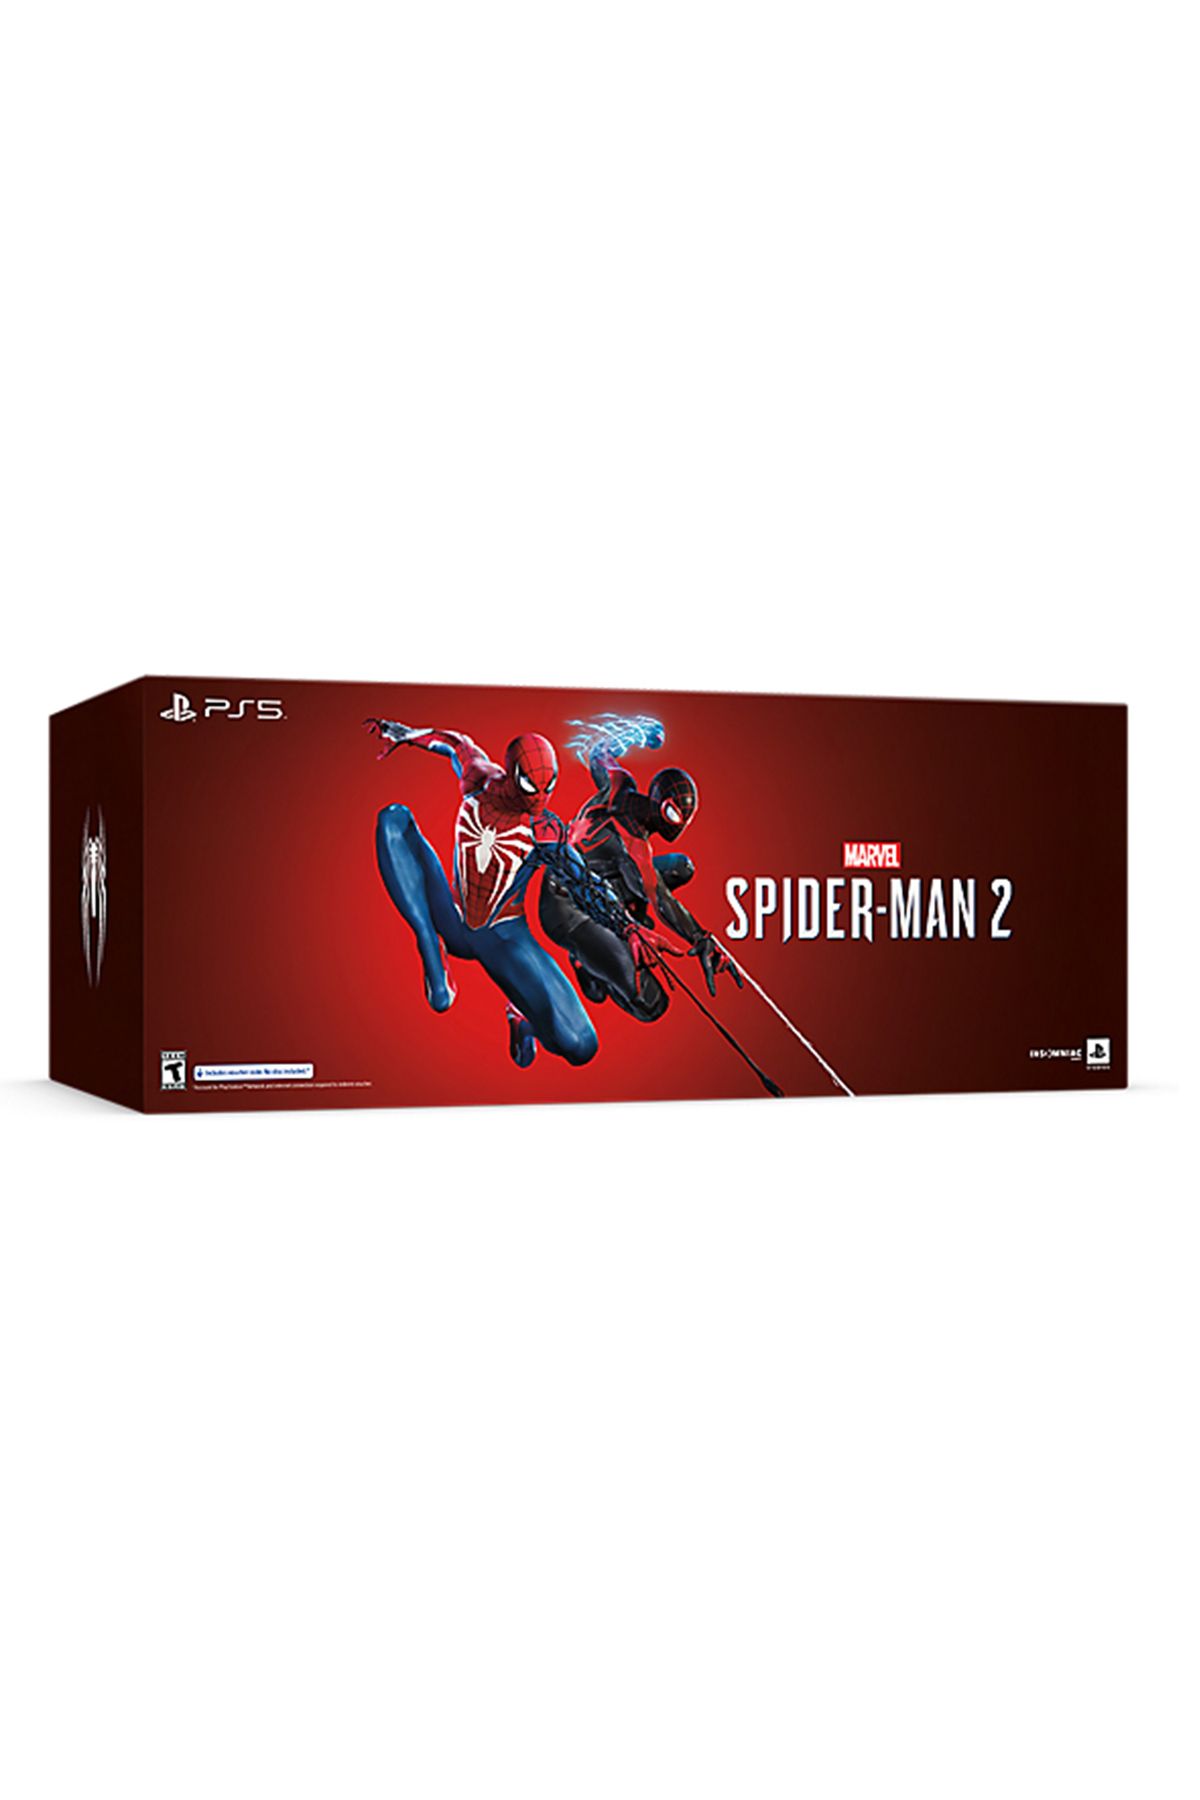 MARVEL Spider-man 2 Collector's Edition Ps5